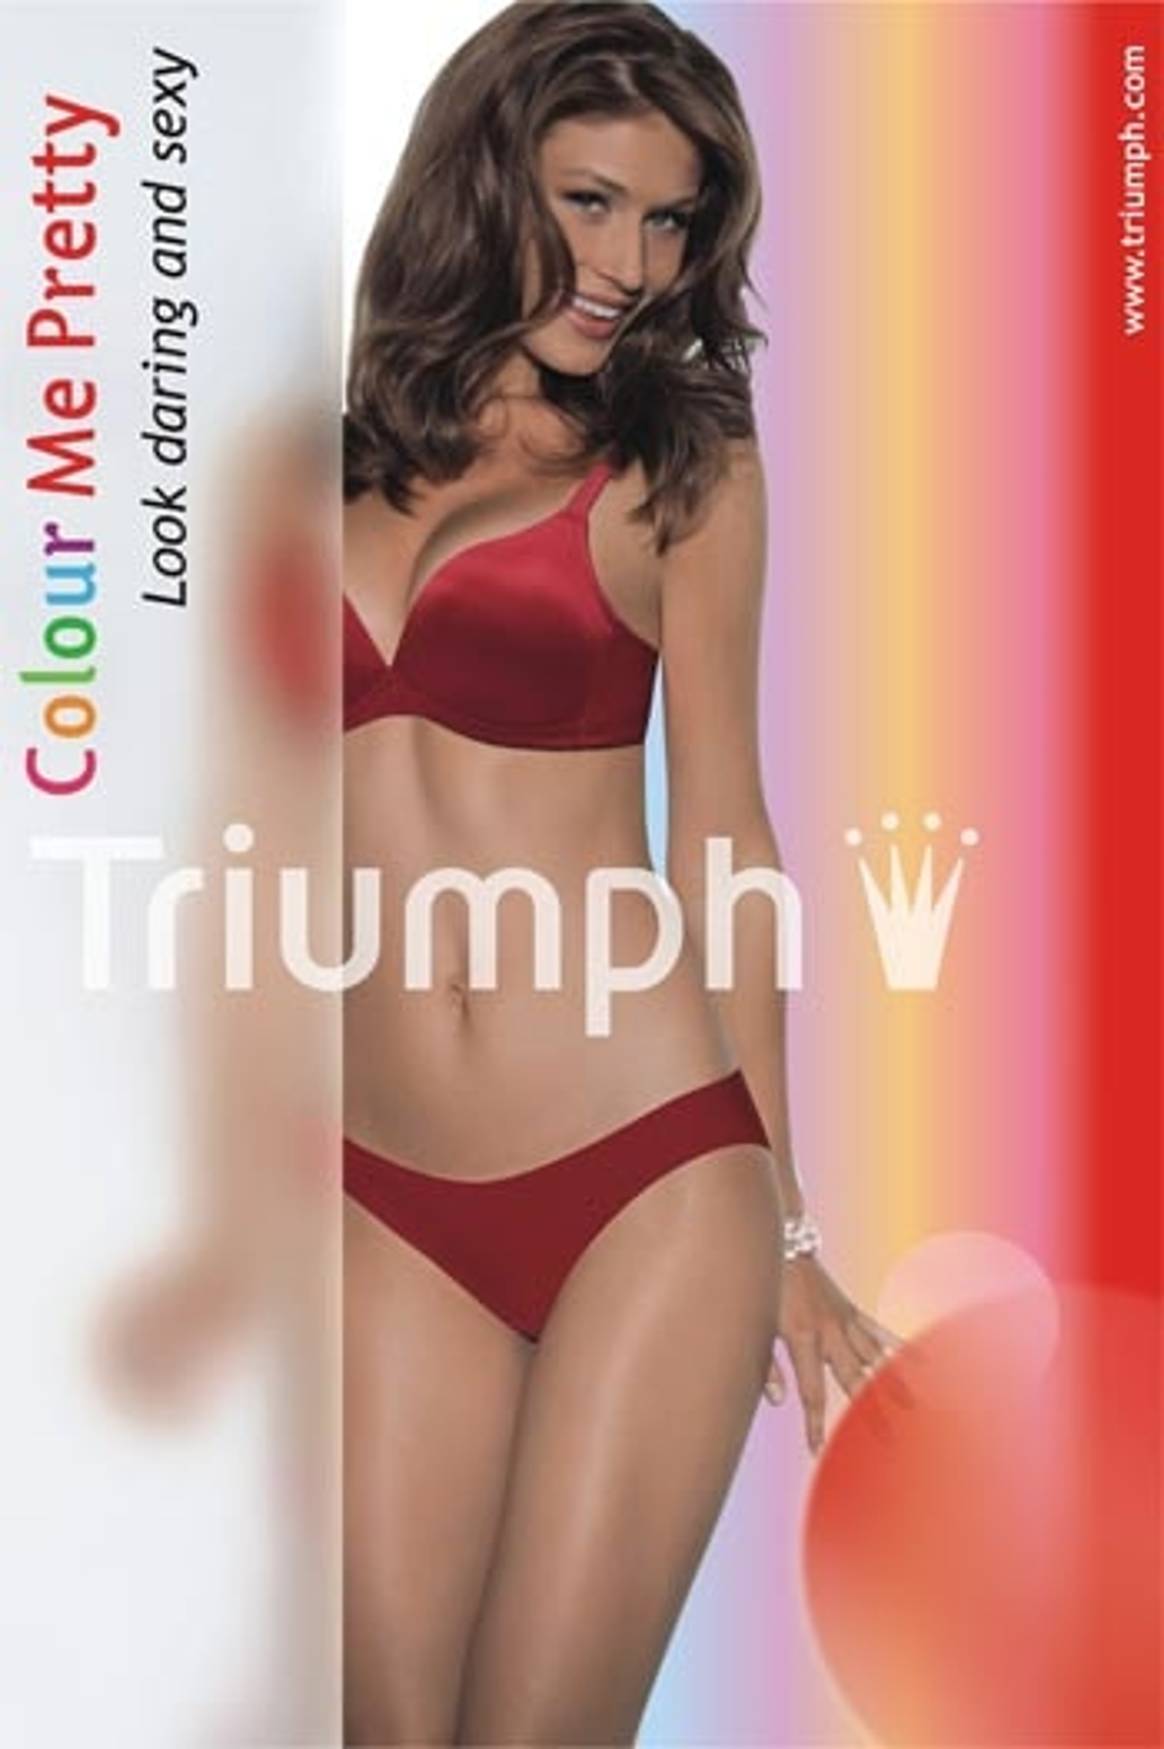 Triumph to focus on new styles, retail expansion